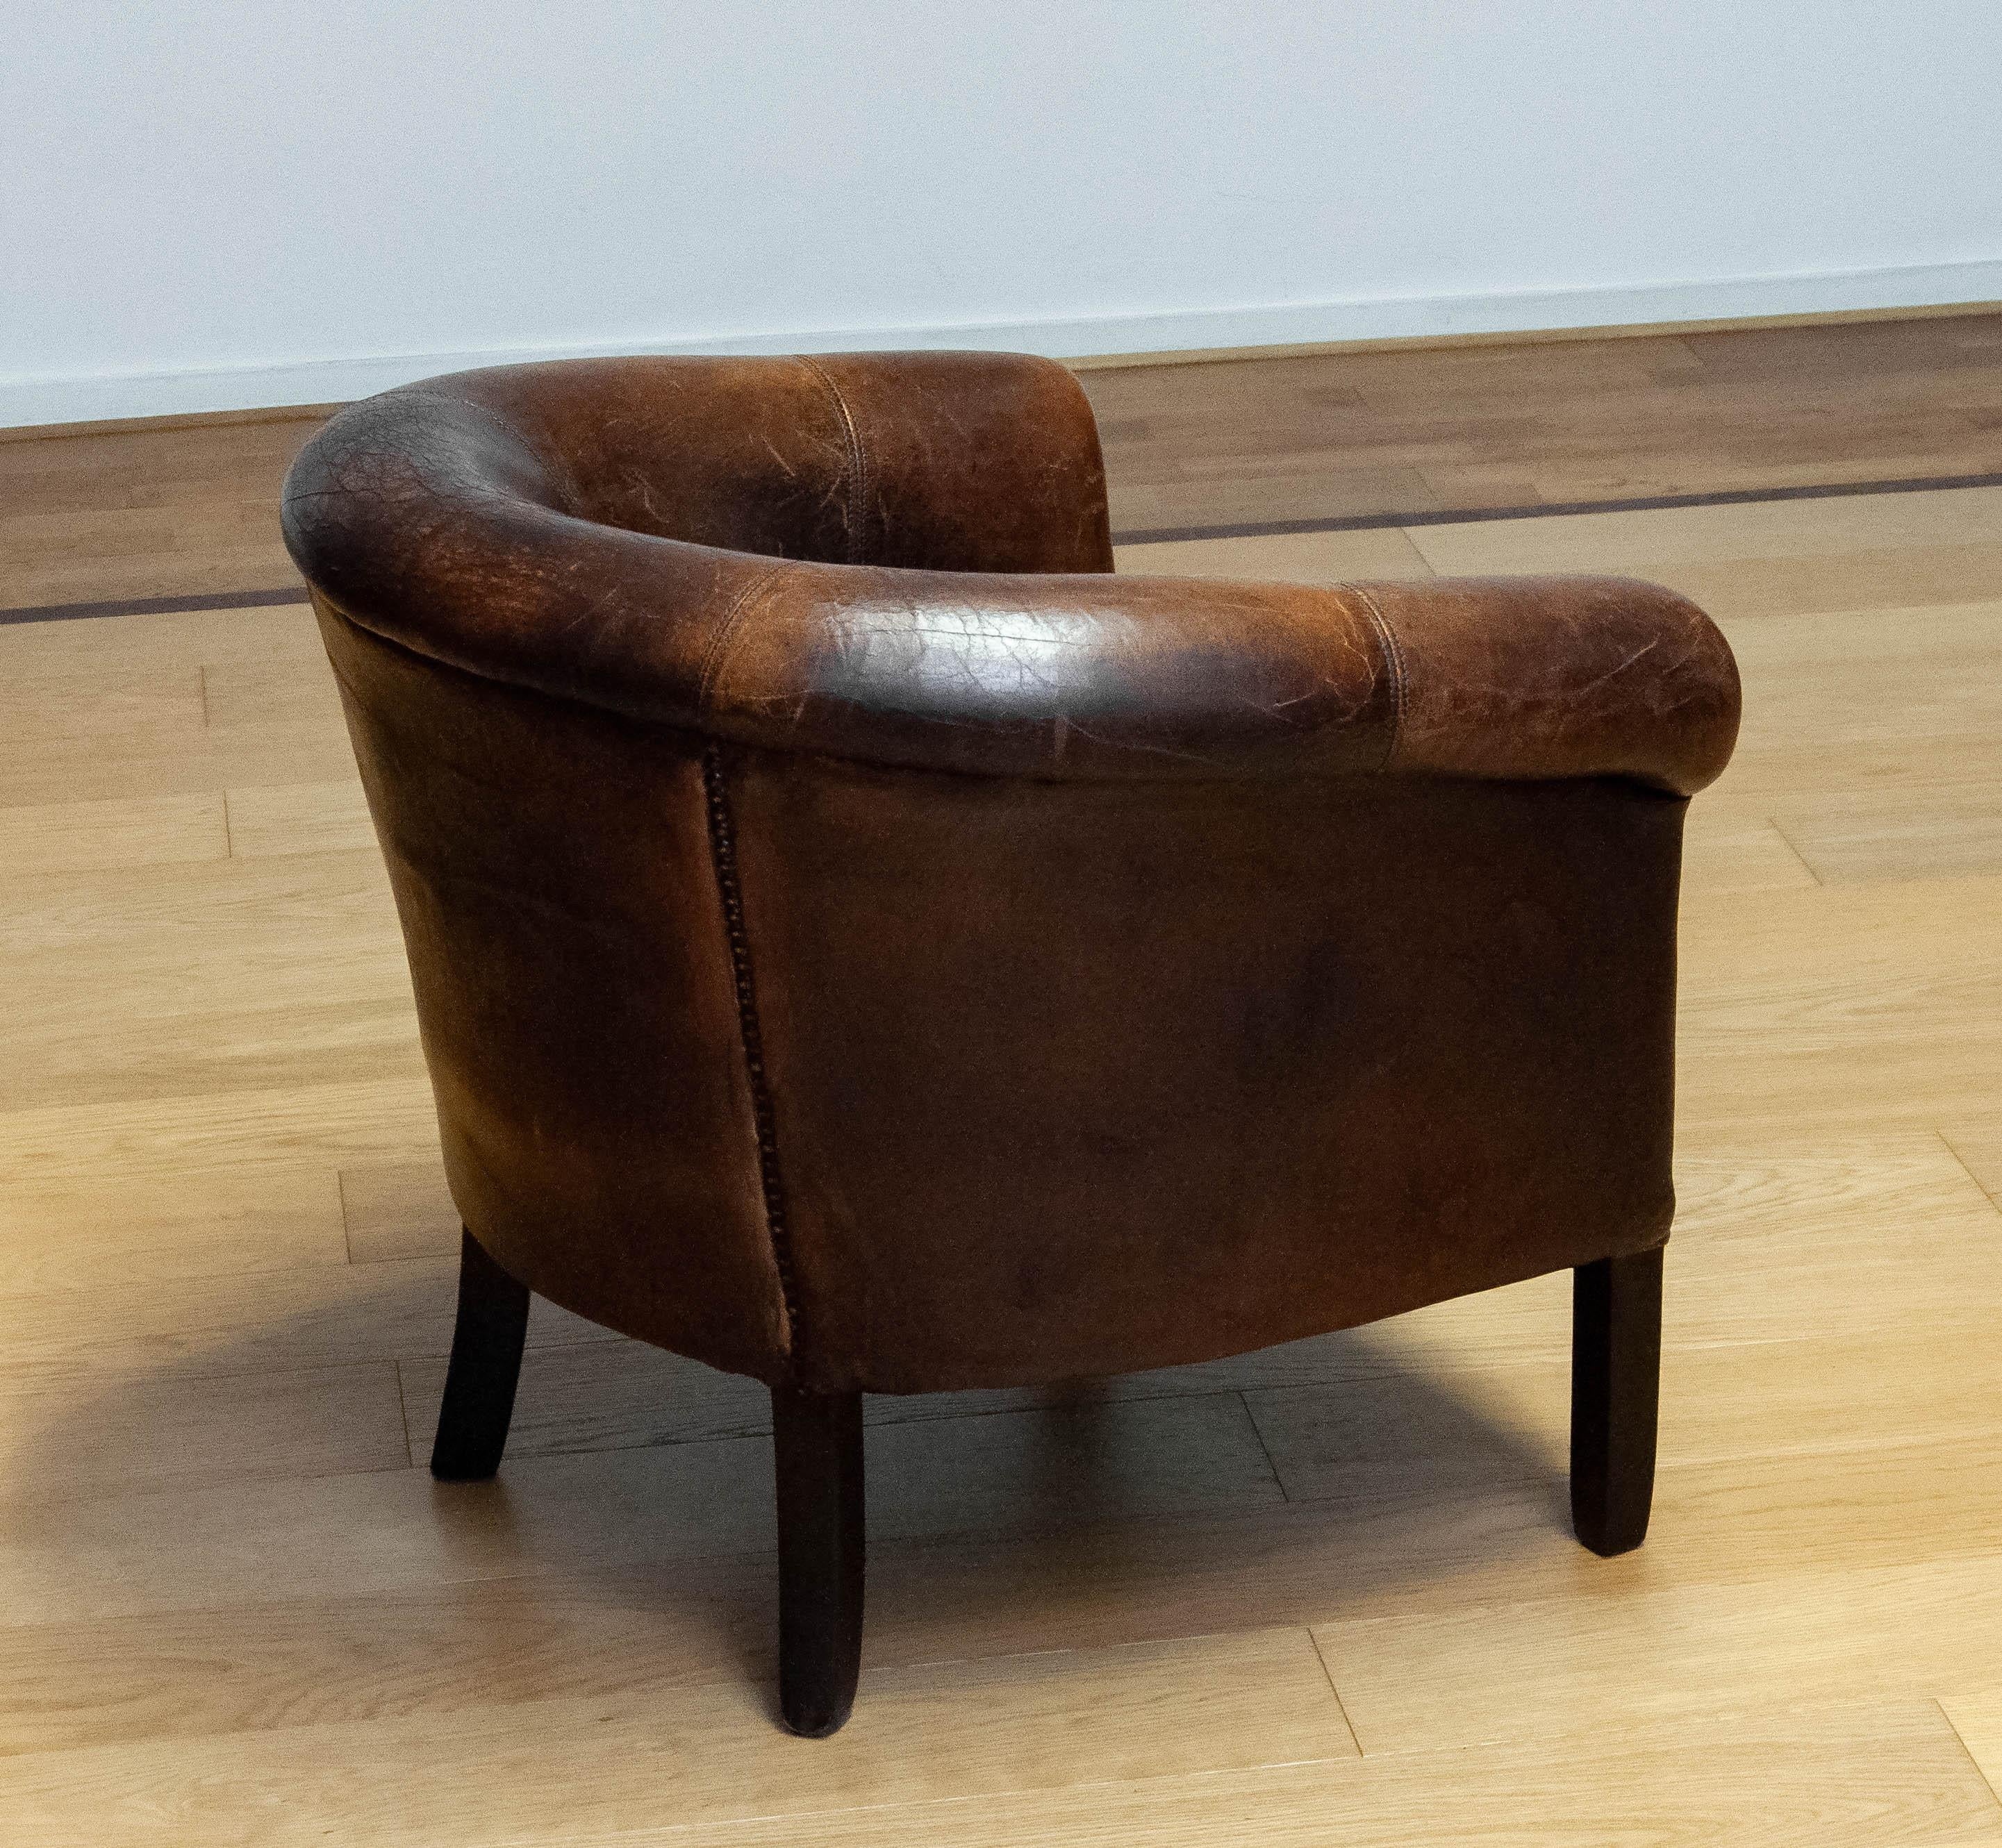 1960 Patinated Dark Brown Dutch Colonial Sheepskin Upholstered Lounge Club Chair For Sale 6